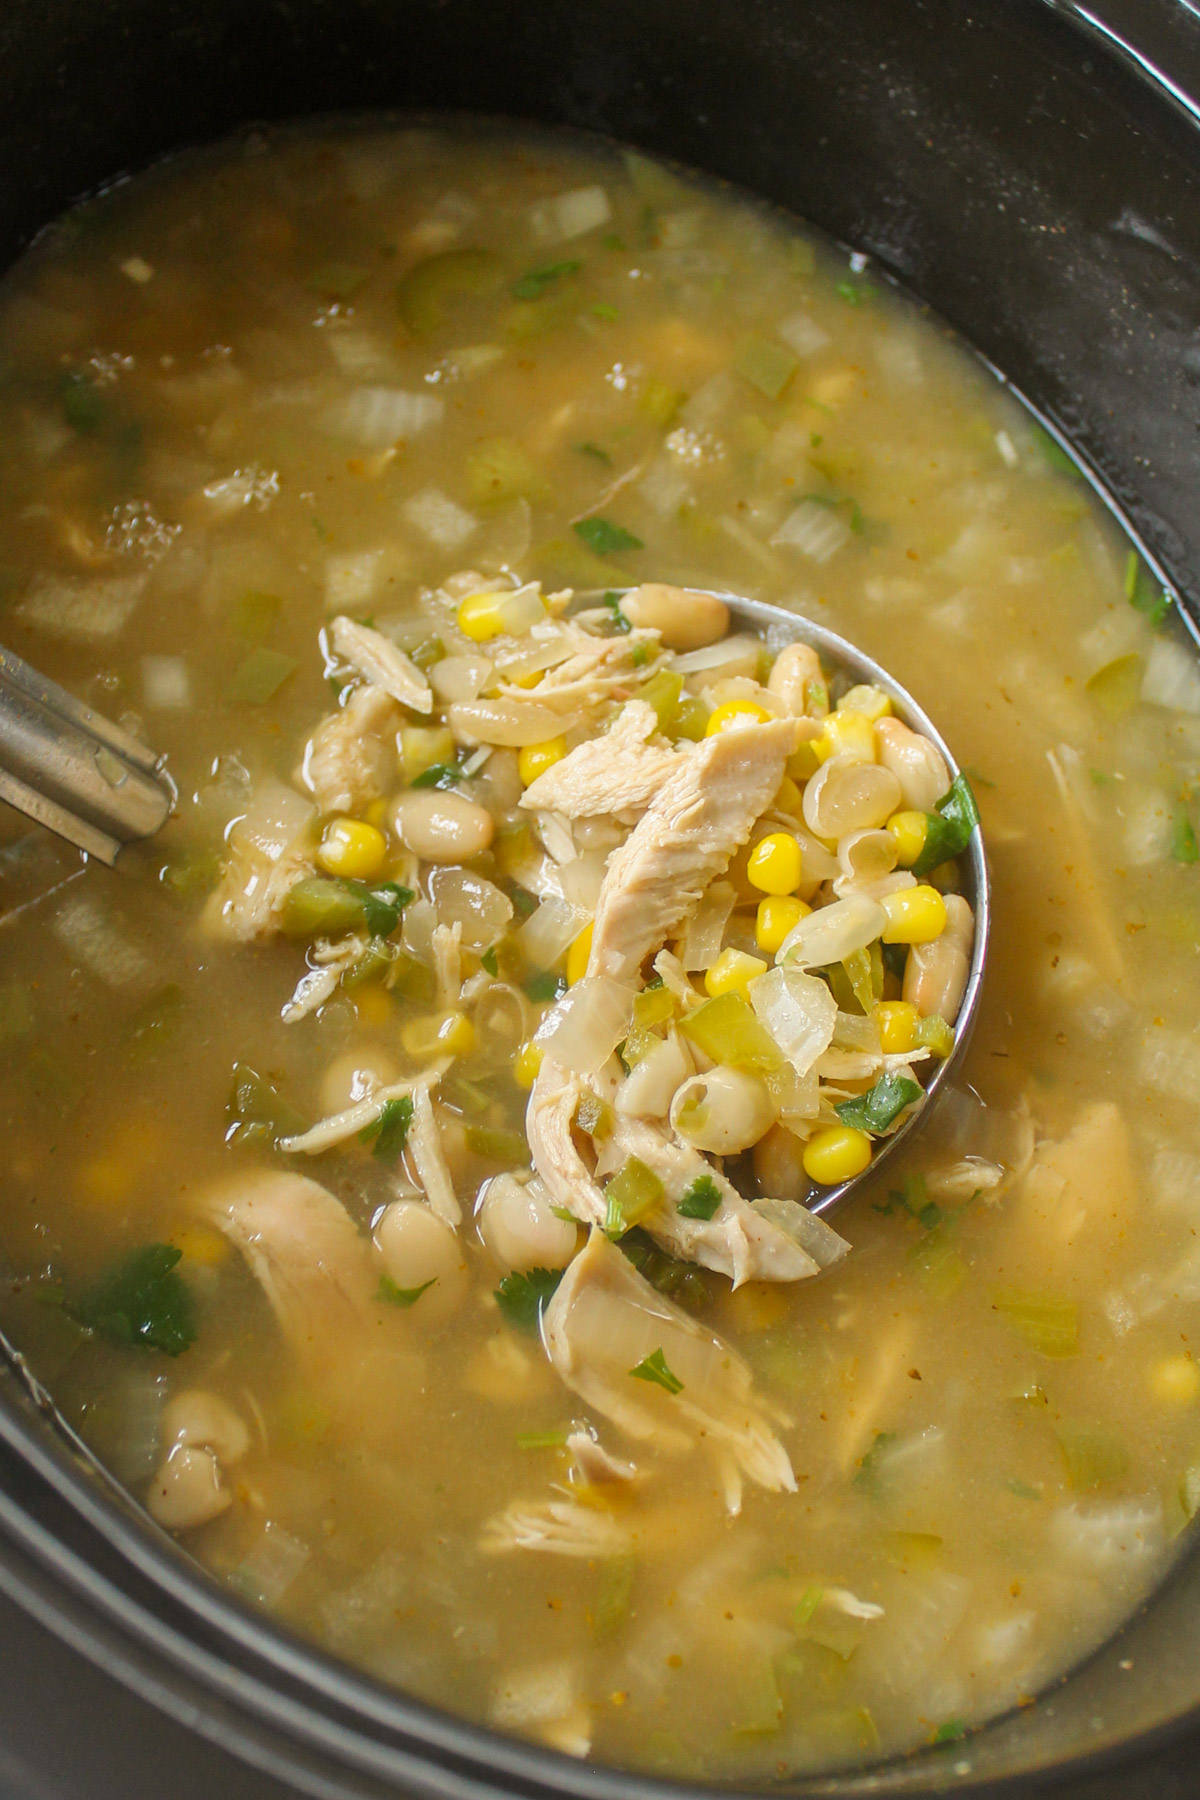 A slow cooker of white chicken chili with a ladle showing the shredded chicken, corn and broth.